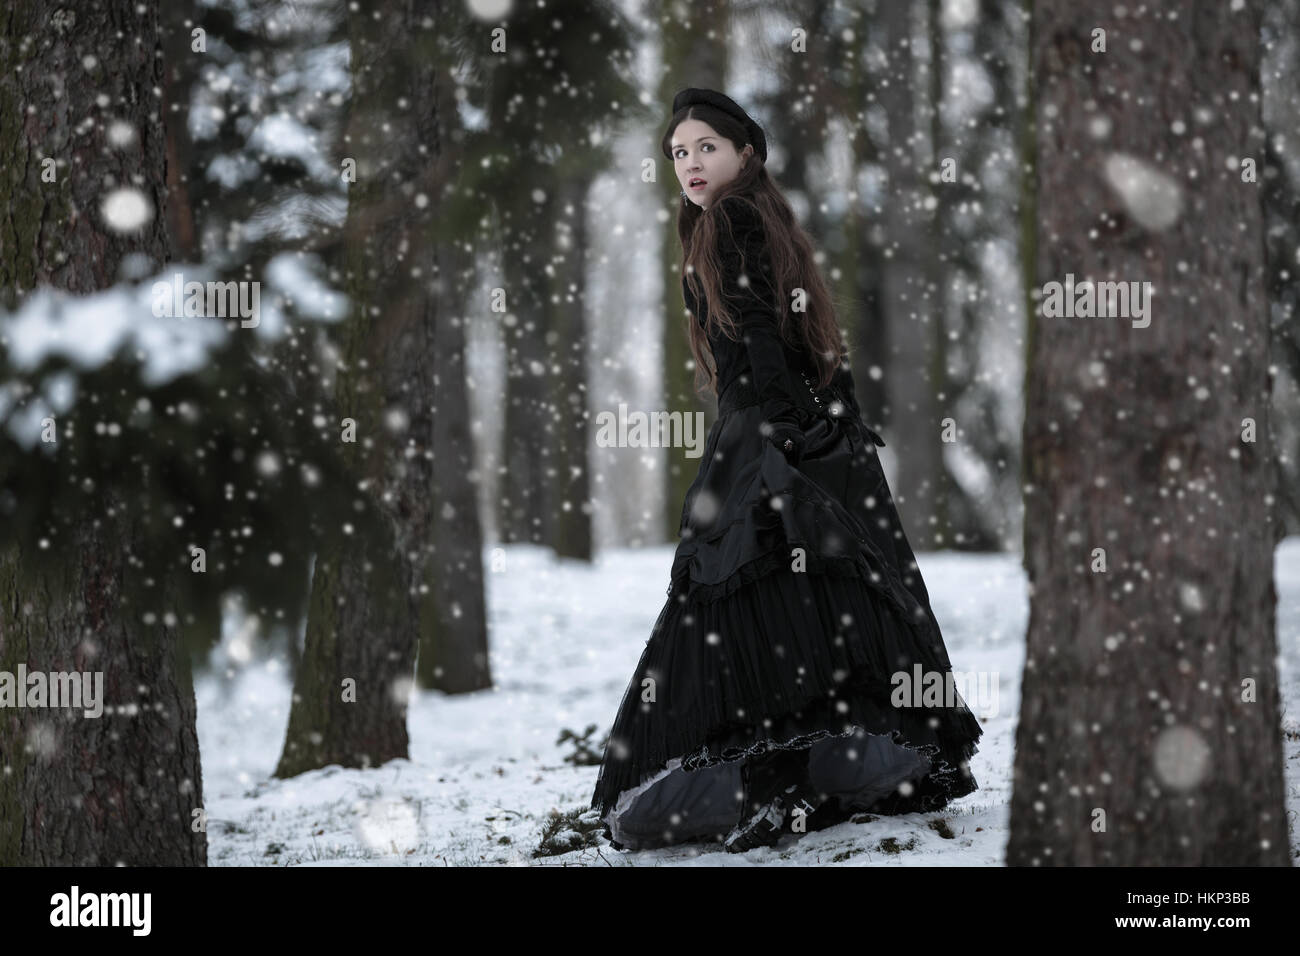 Woman in black Victorian dress in the winter park Stock Photo